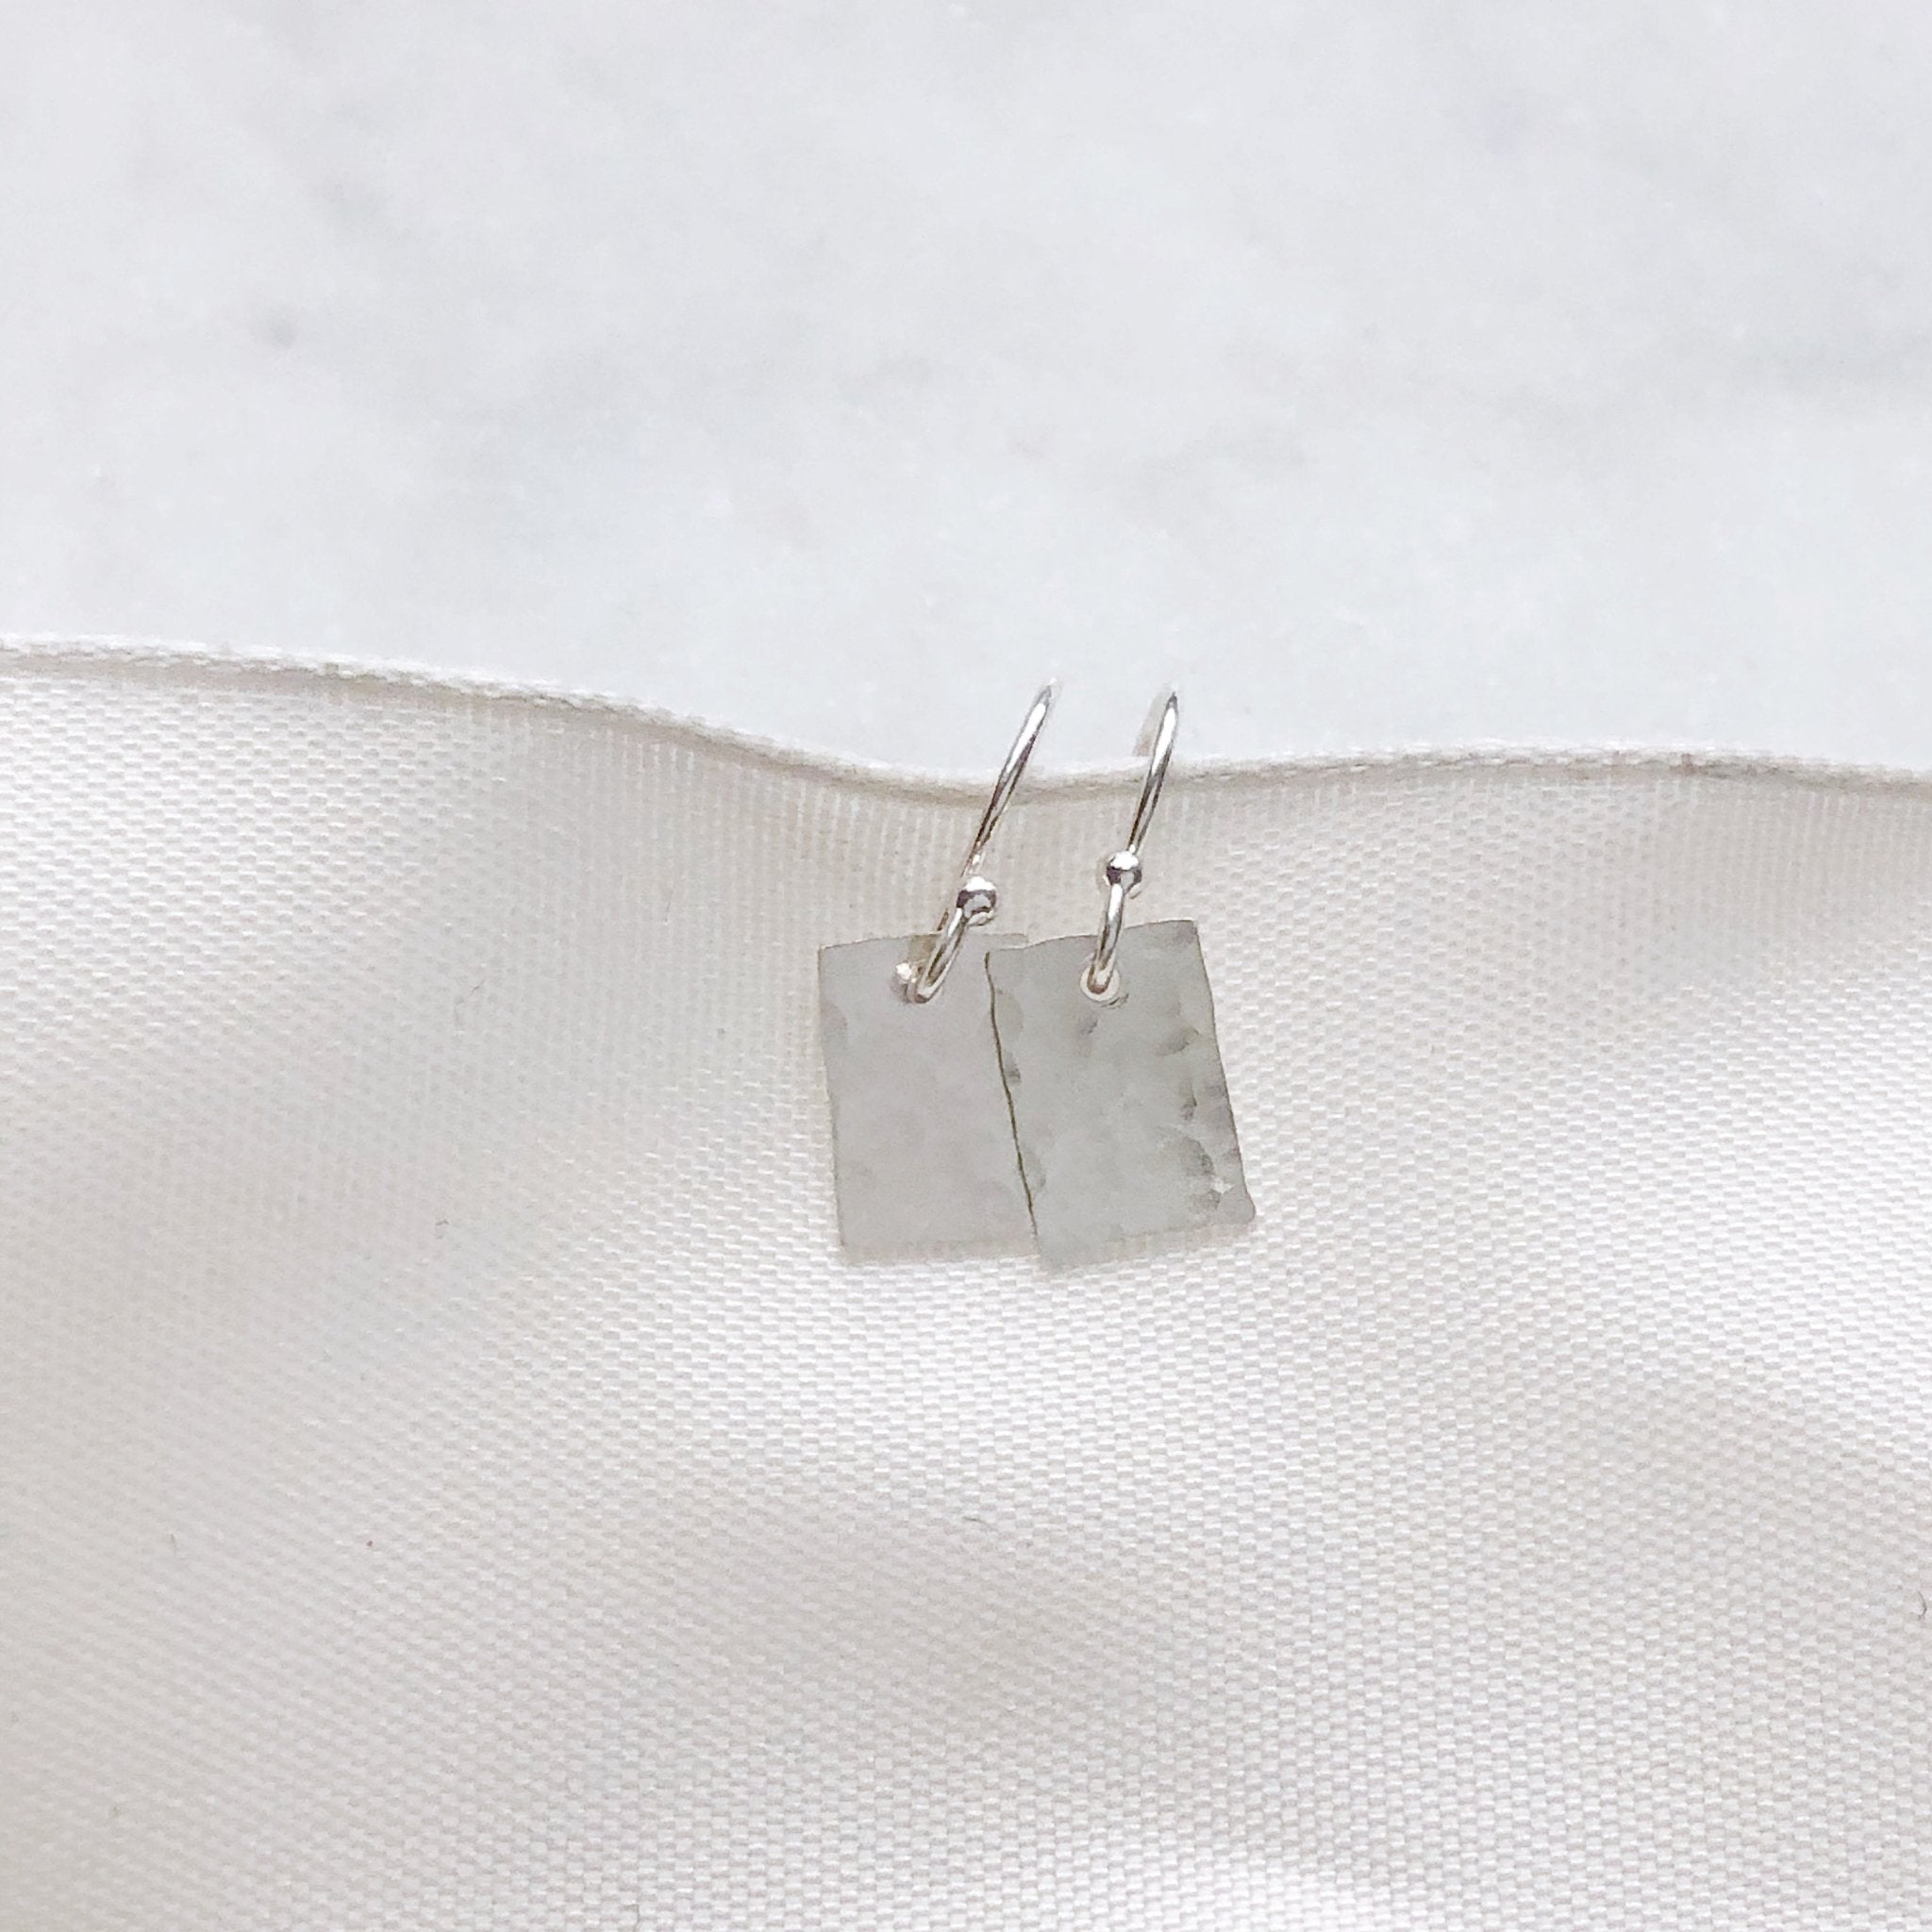 Silver Lordes Earrings by Sarah Cornwell Jewelry. Dainty, shimmery, silver textured rectangle earrings on a white background.